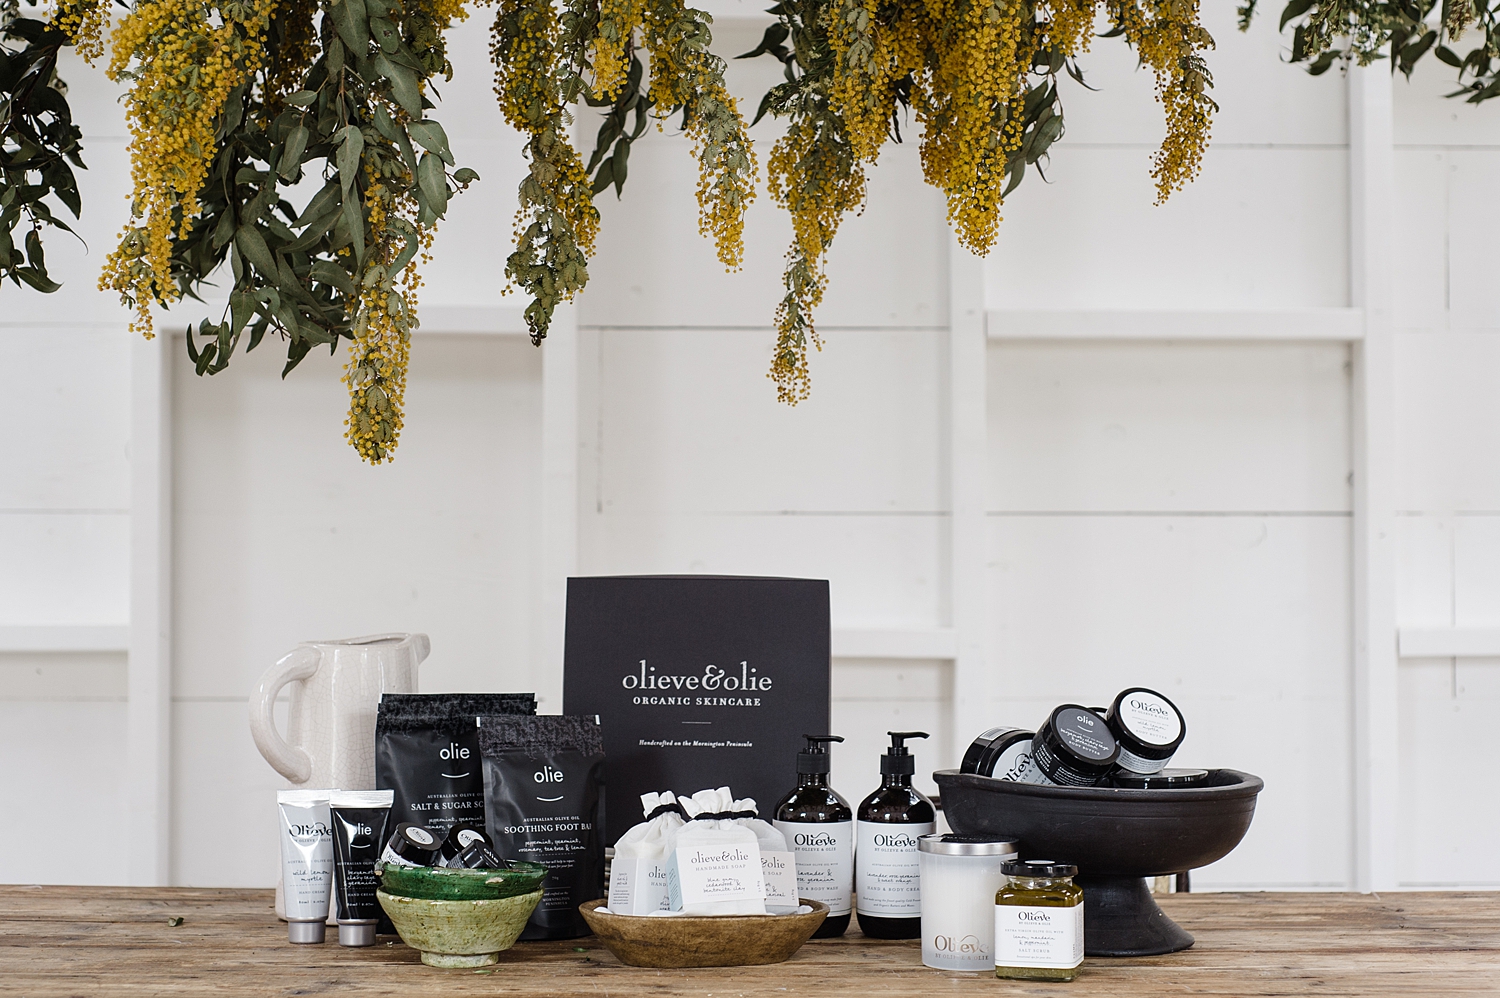 Olieve & Olie's range of skincare products on a table with florals hanging from the ceiling.